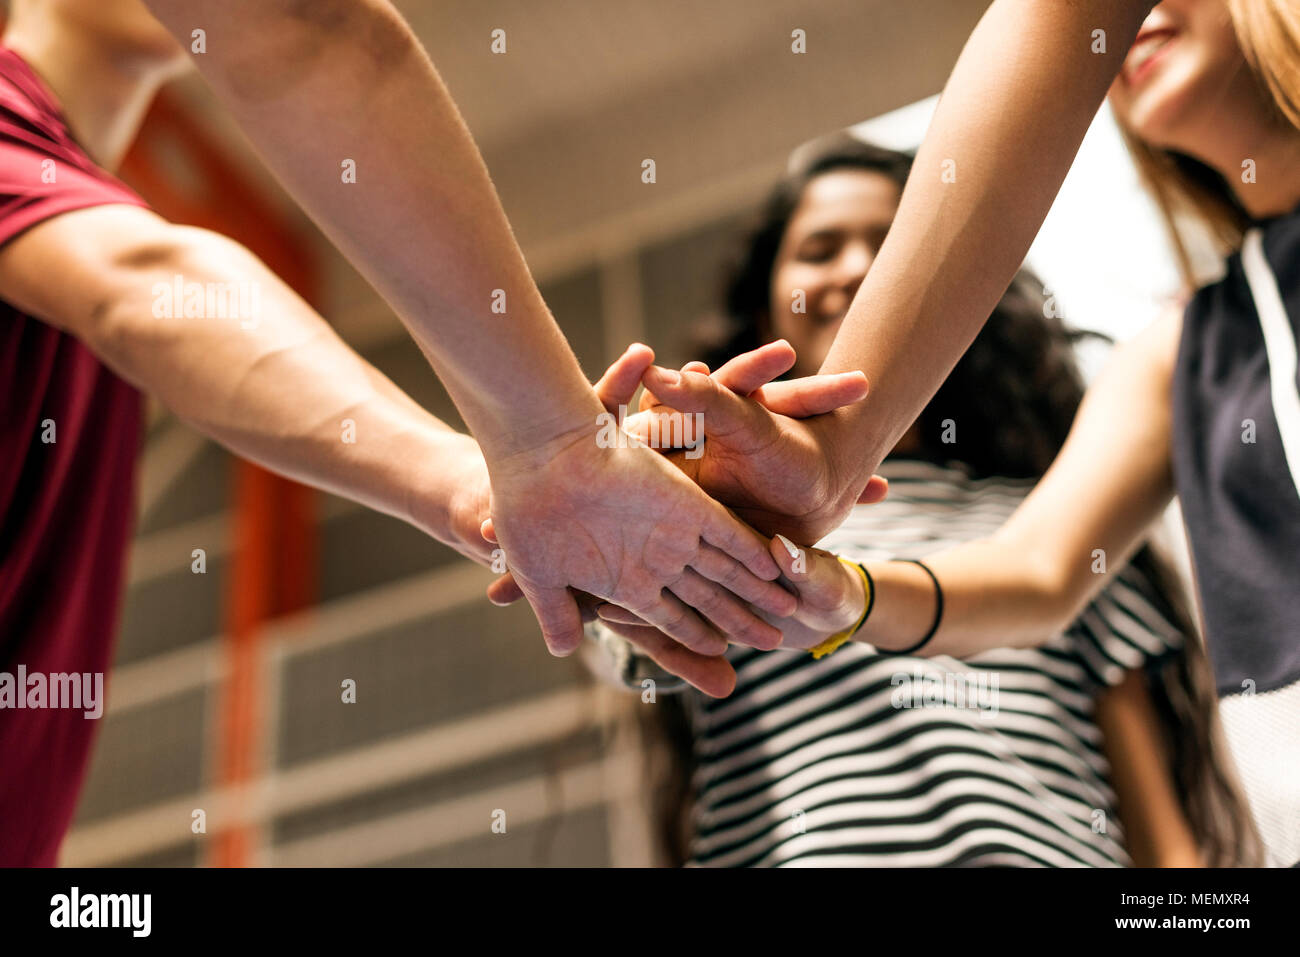 Group of teenager friends on a basketball court teamwork and togetherness concept Stock Photo